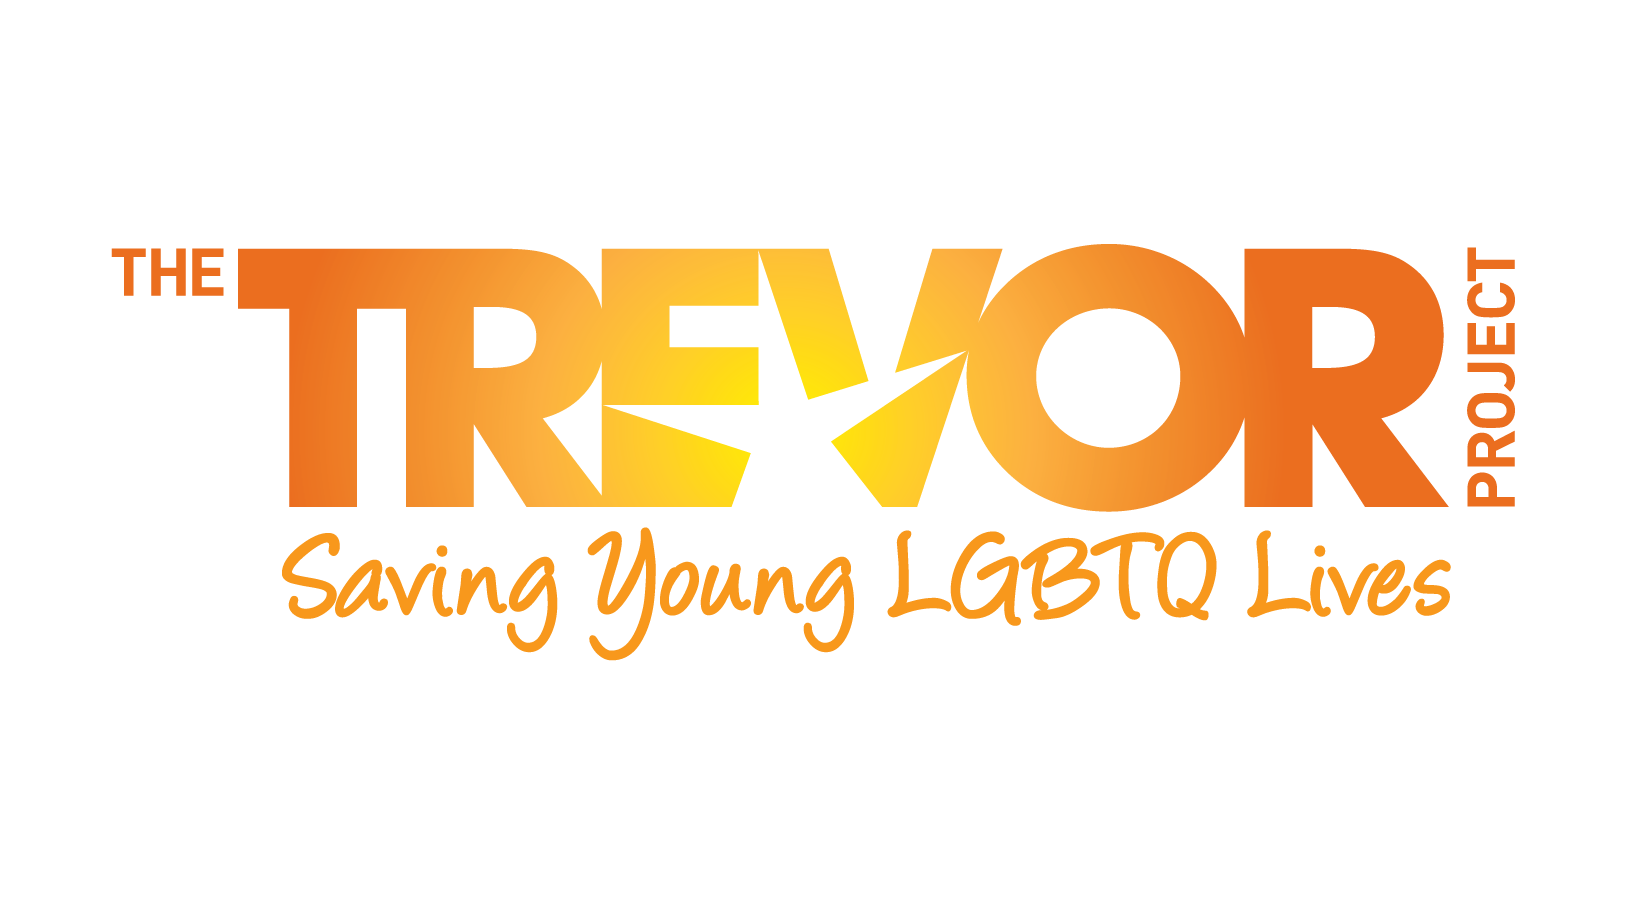 Nominee The Trevor Project, Saving Young LGBTQ Lives